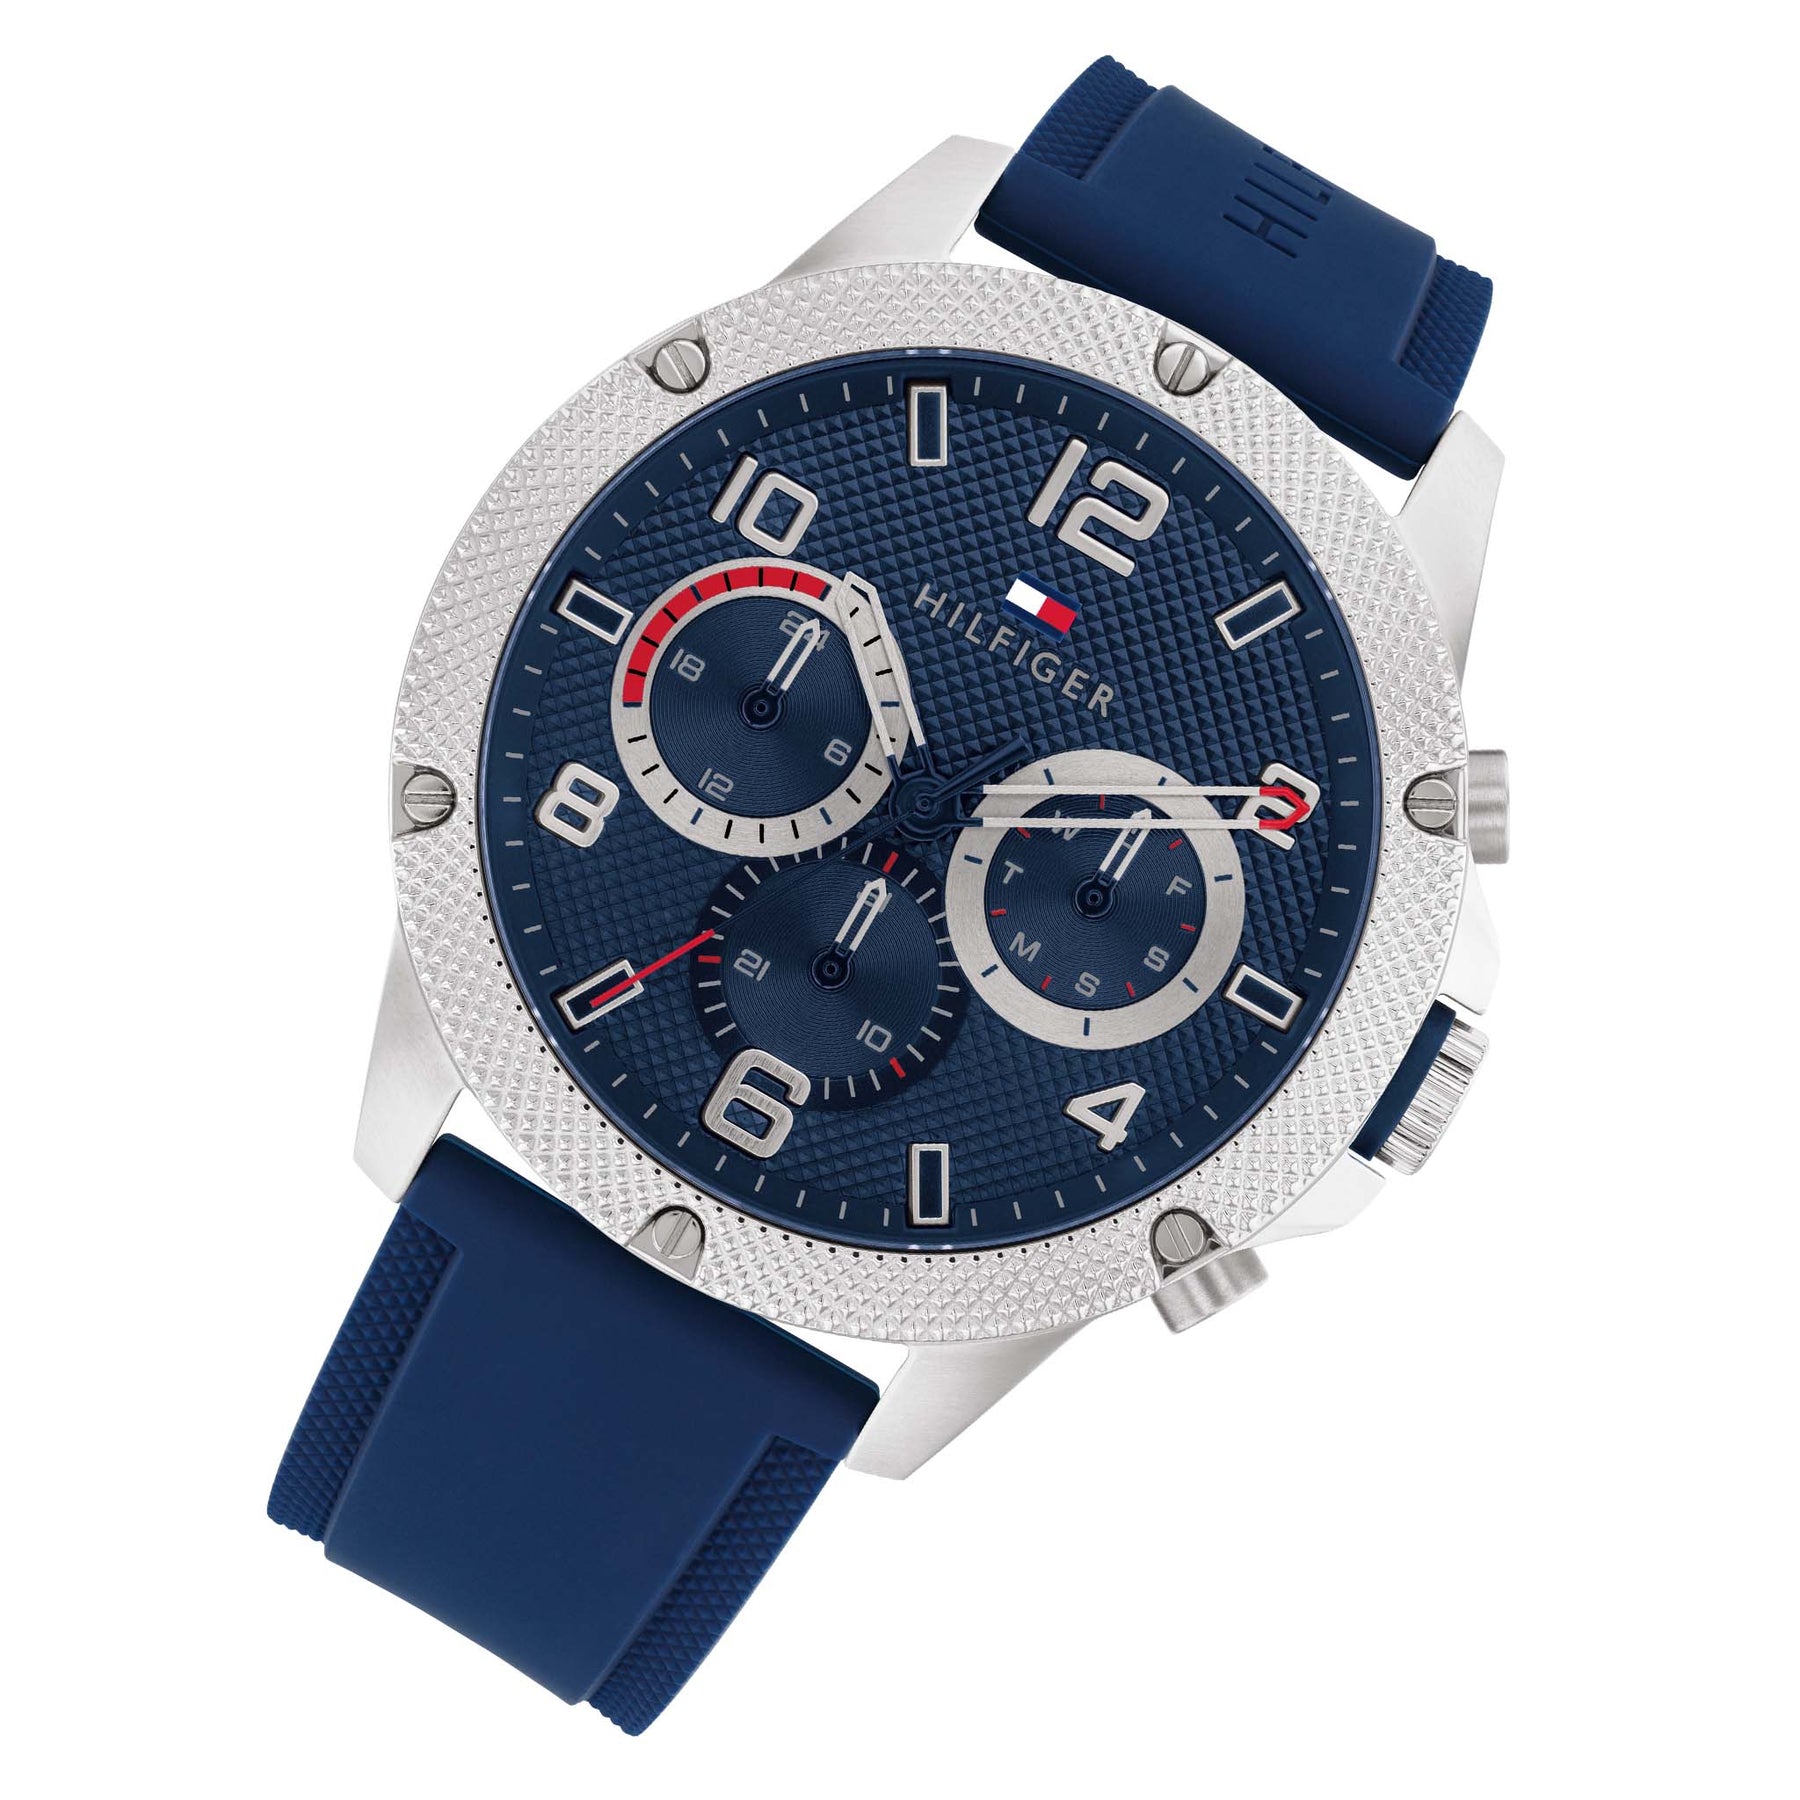 Hilfiger Watch Tommy Australia 1792027 Blue – Men\'s Multi-function Silicone Factory Watch - The